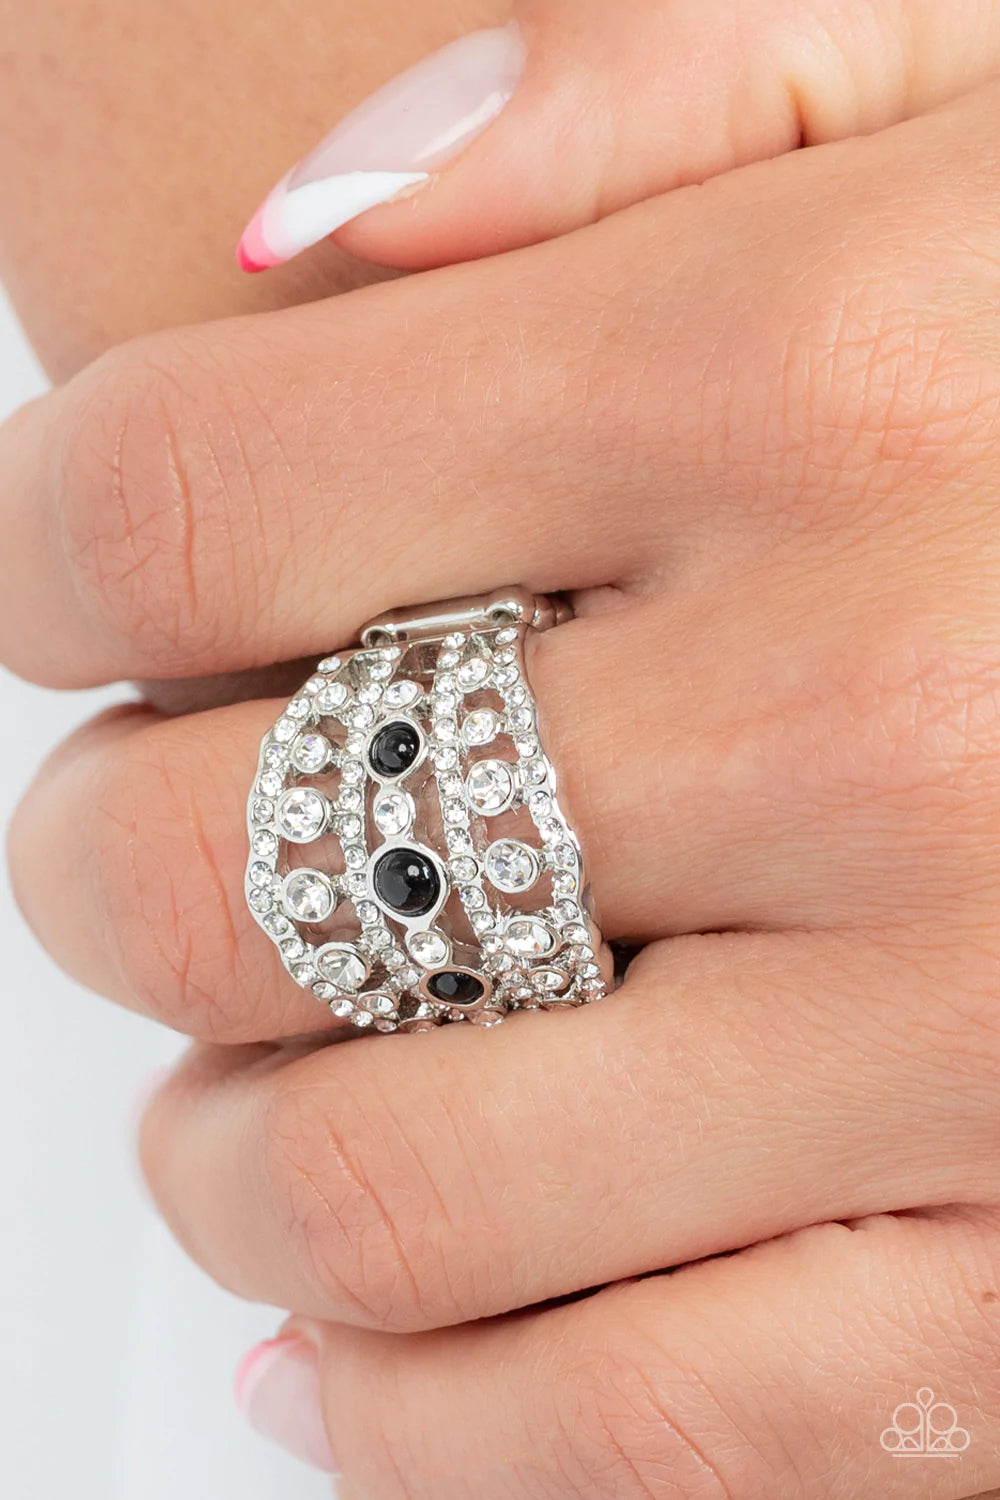 Paparazzi Accessories Sailboat Bling Layers of dainty silver bands, encrusted with sparkling white rhinestones, are accented with a trio of dainty black beads on the centermost band. The stacked layers sweep across the finger, making an exquisite centerpi